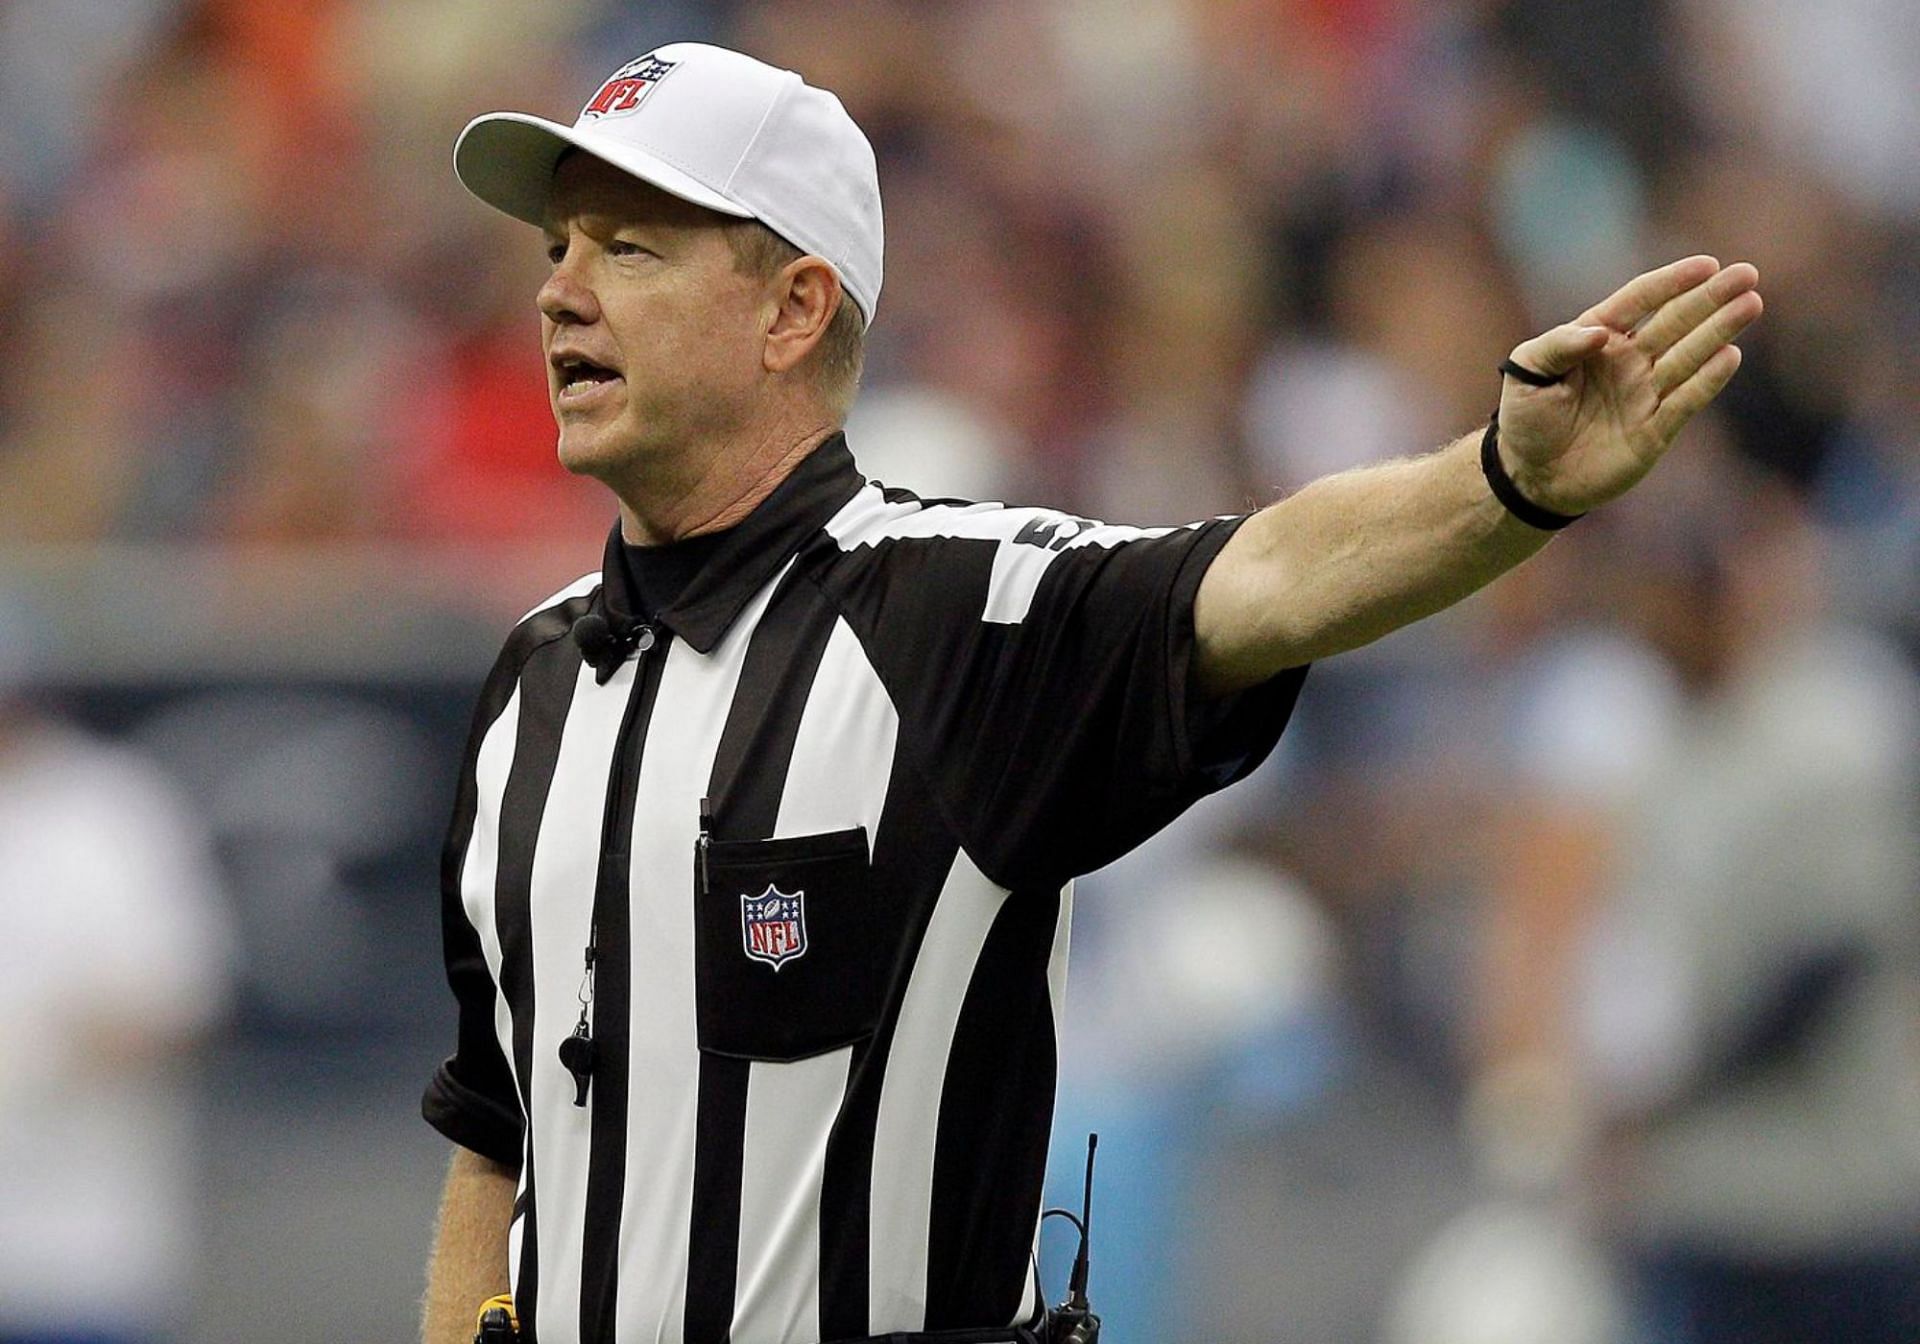 NFL referee Carl Cheffers at the Super Bowl in 2017